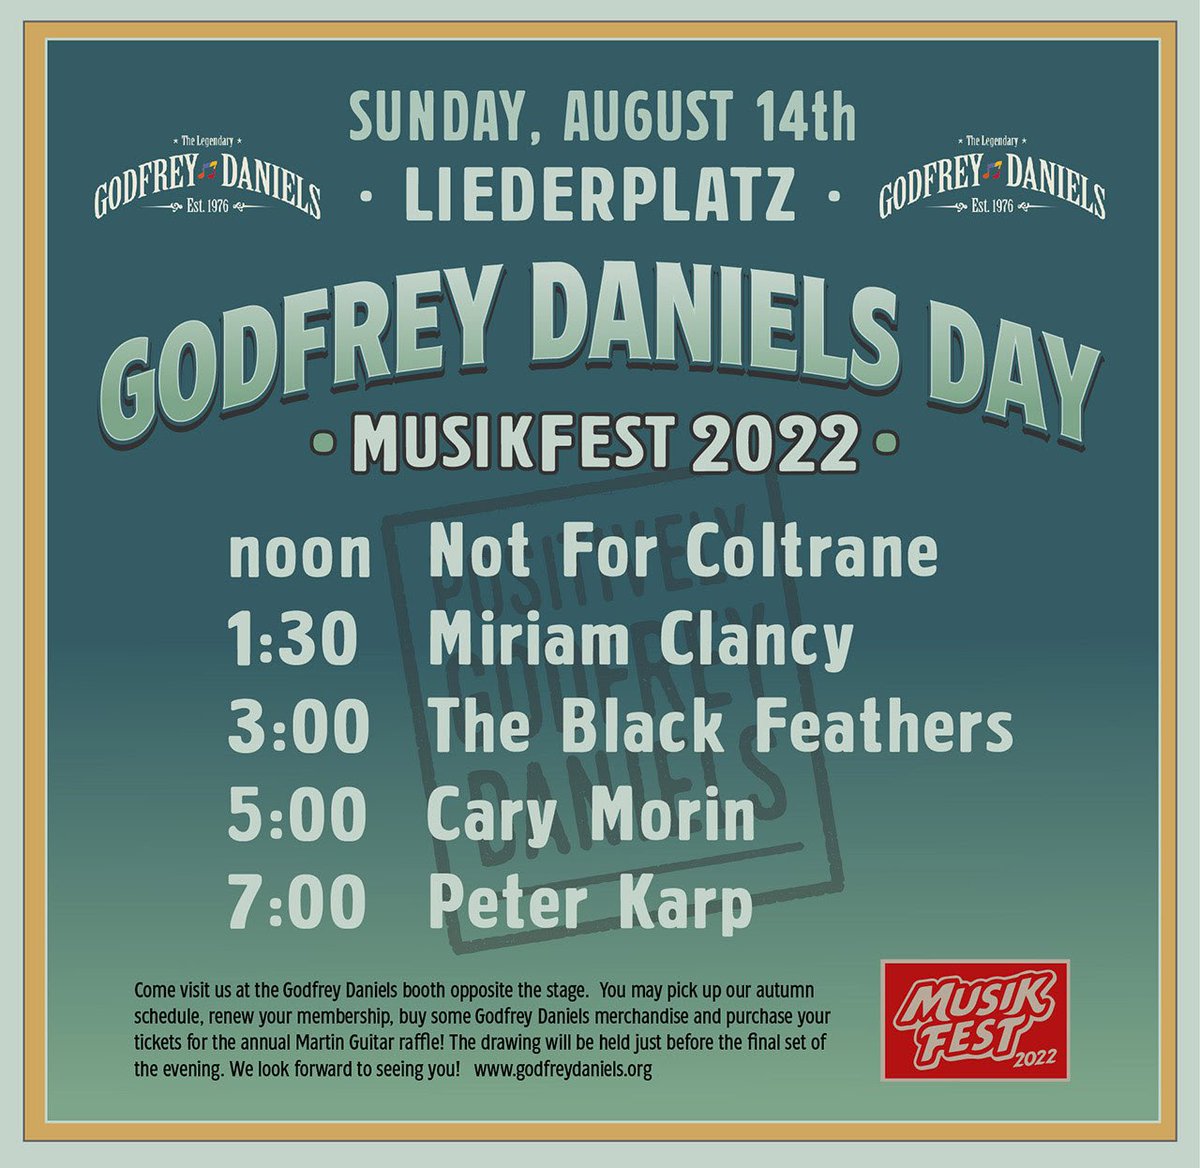 So thrilled to once again present GODFREY Daniels Day at Musikfest 2022! Sunday, Aug. 14th, beginning at noon on the Liederplatz stage. Come out for a day of great music and get your tickets to win a Martin guitar!